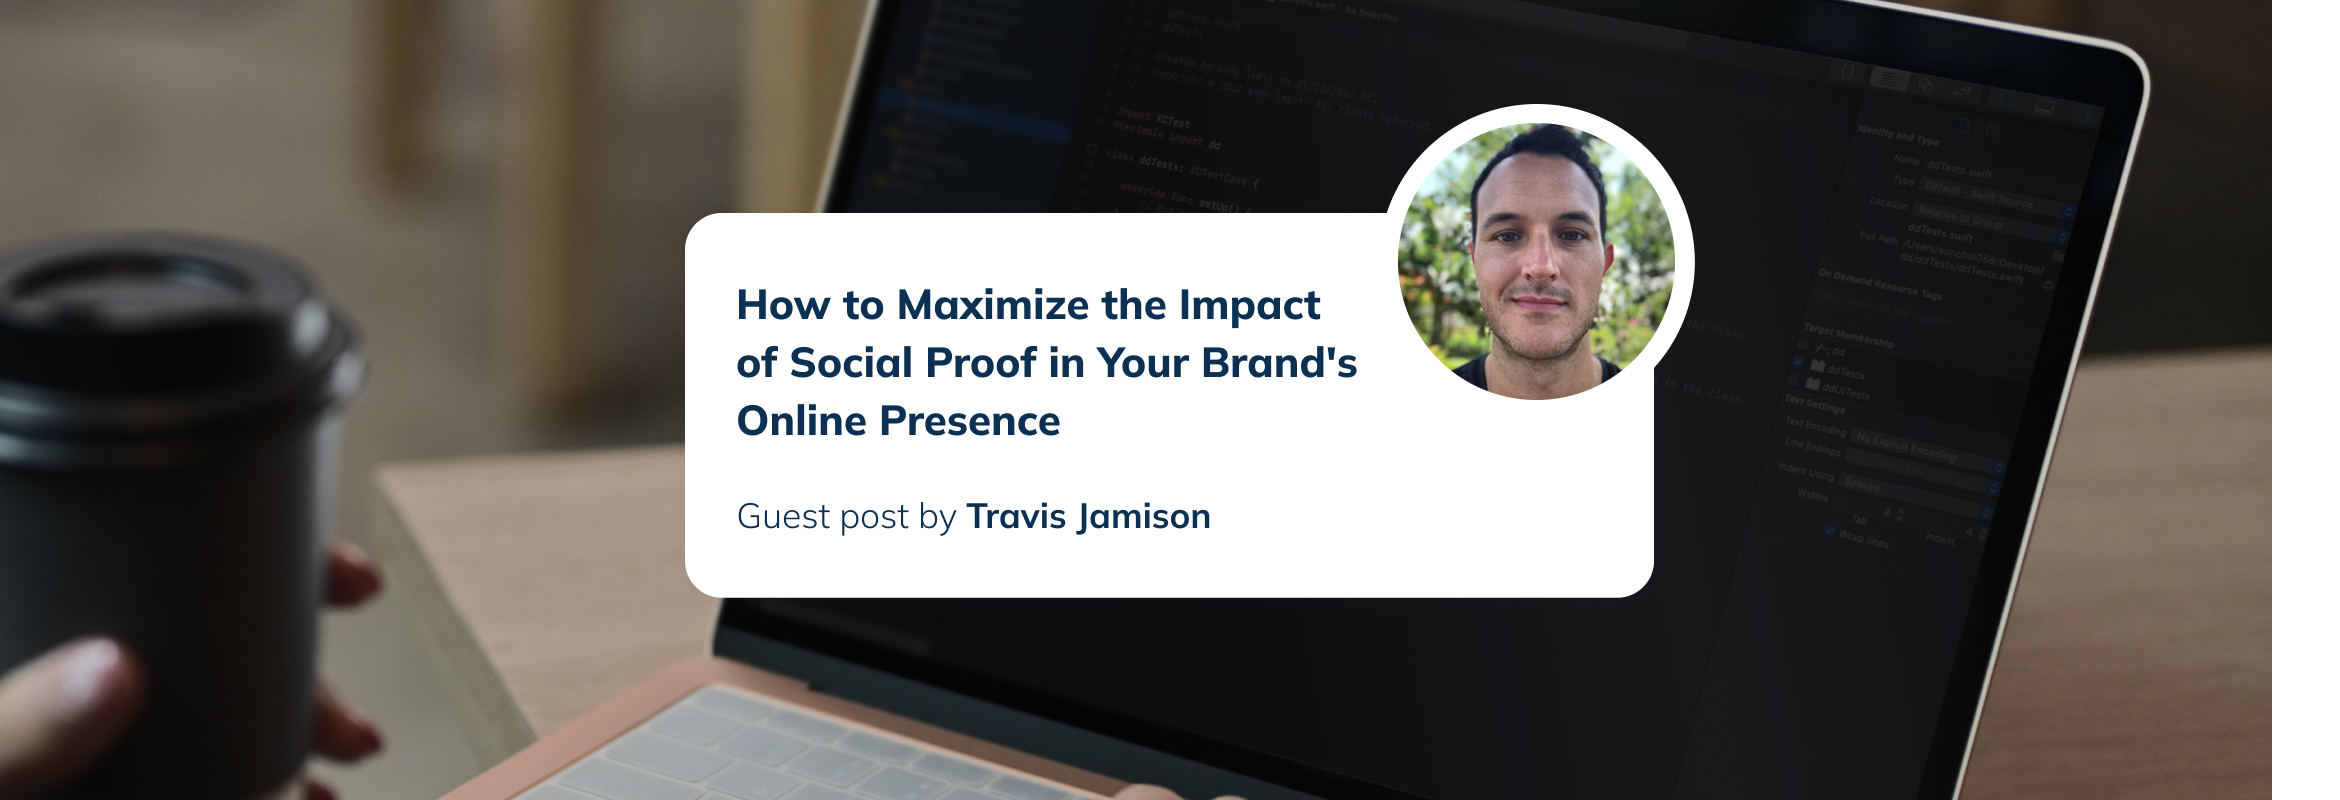 How-to-Maximize-the-Impact-of-Social-Proof-in-Your-Brands-Online-Presence